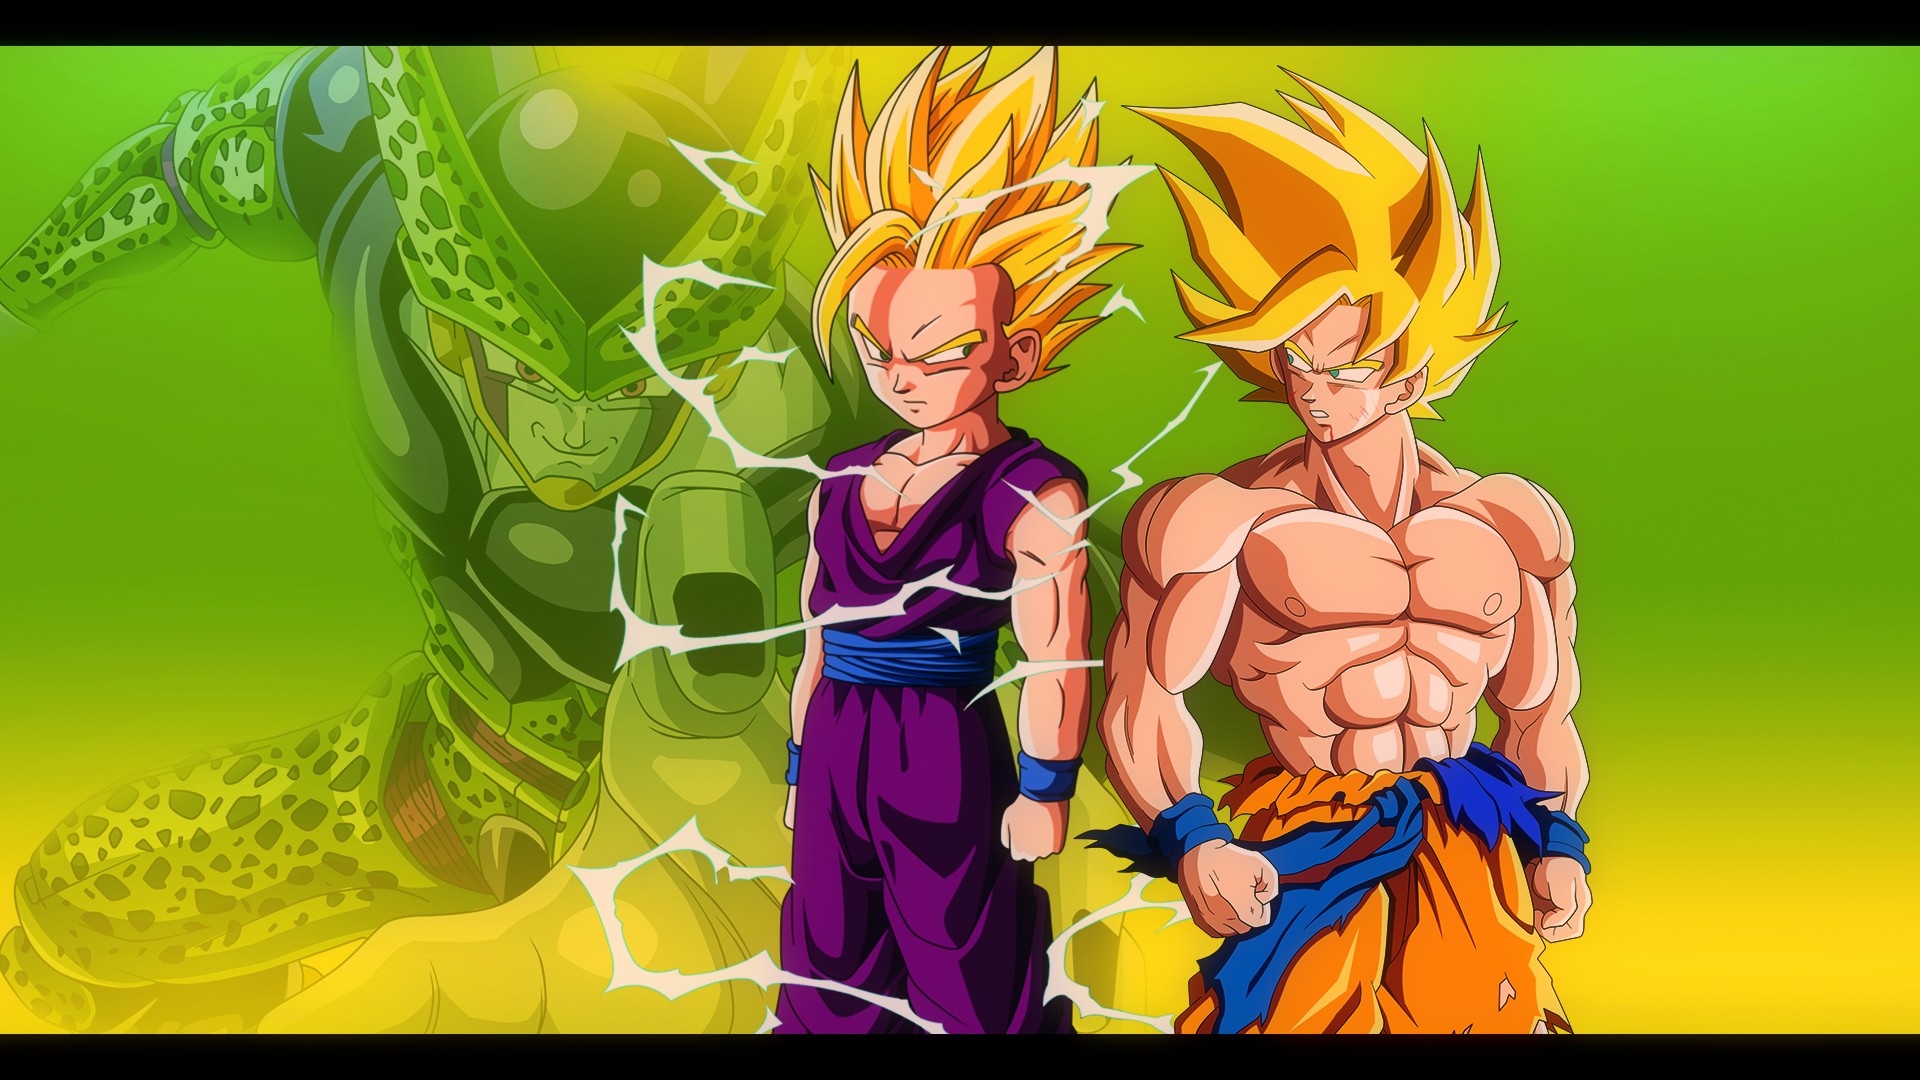 Goku And Gohan Vs Cell Dbz Wallpaper By Oirigns On